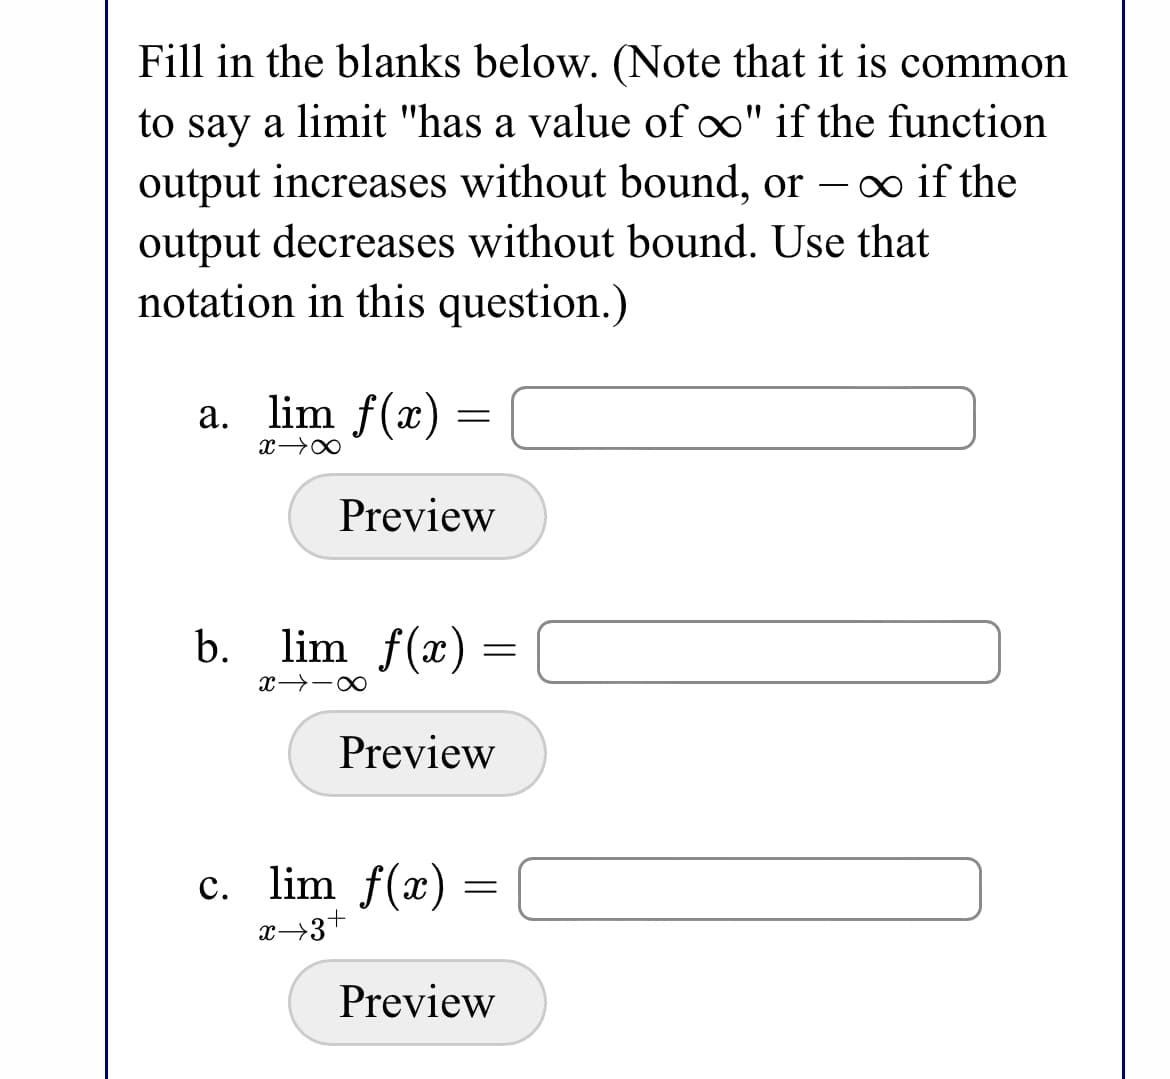 Fill in the blanks below. (Note that it is common
to say a limit "has a value of oo" if the function
output increases without bound, or – o if the
output decreases without bound. Use that
notation in this question.)
a. lim f(x)
Preview
b.
lim f(x) :
Preview
c. lim f(x) =
Preview
